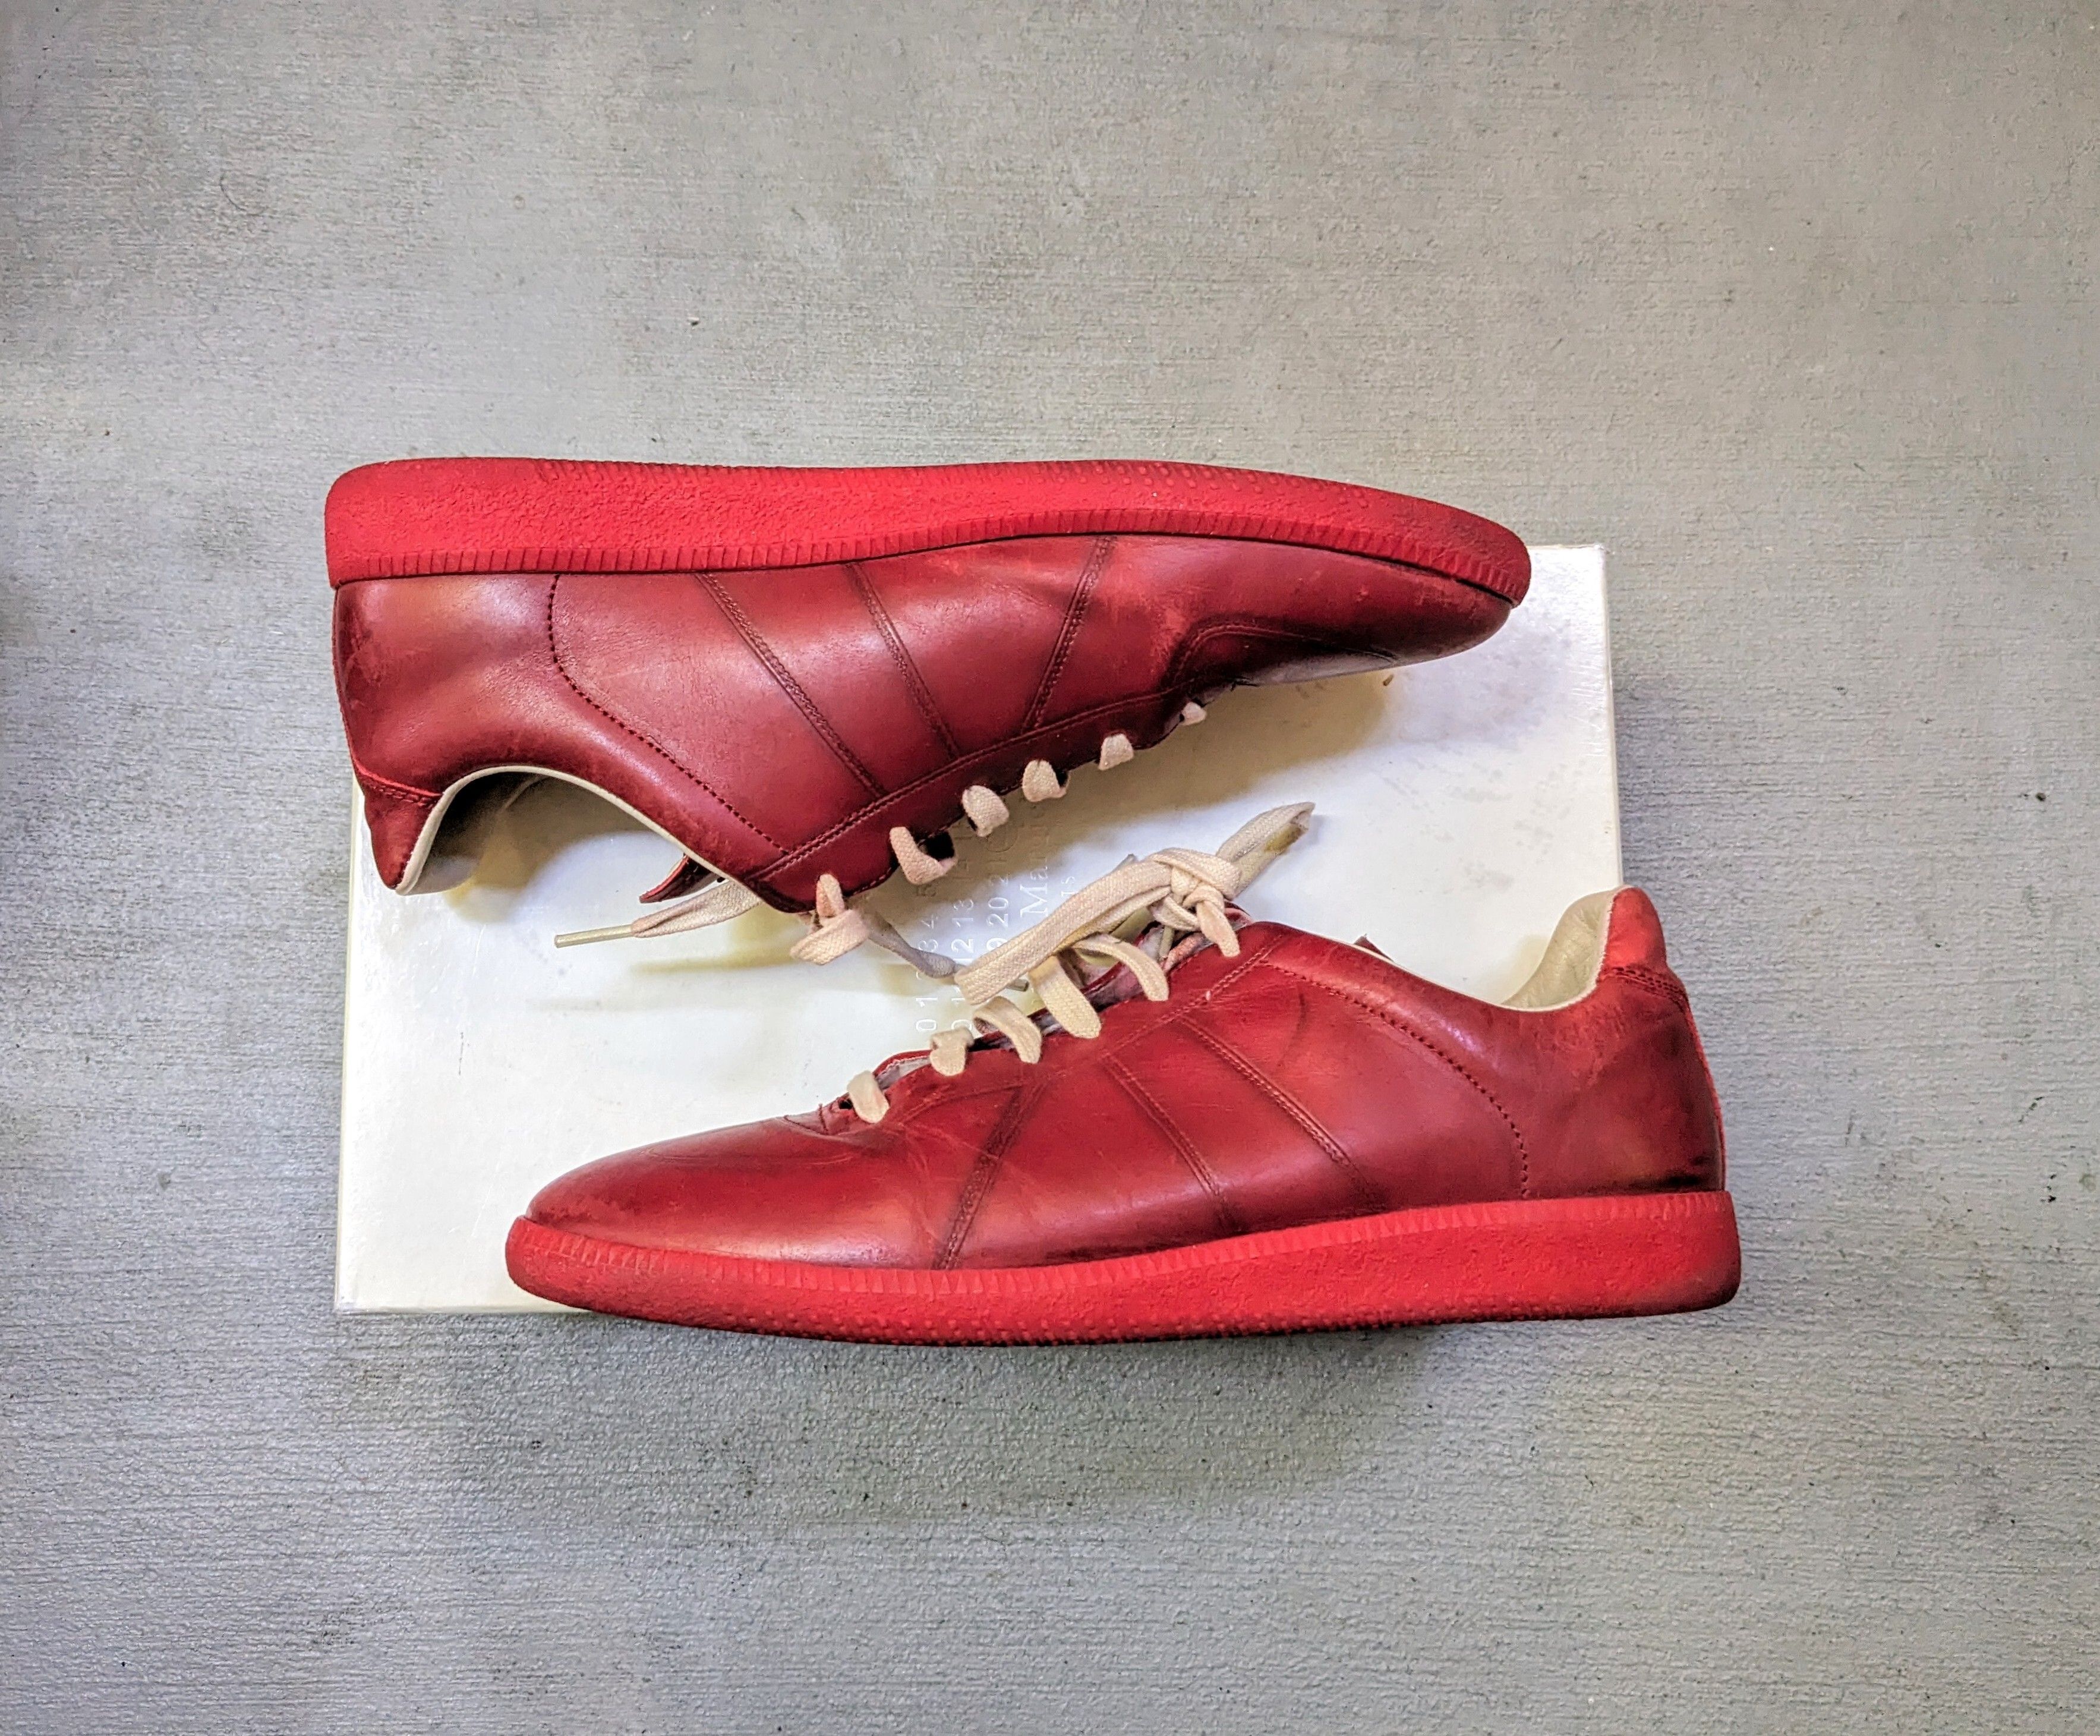 Pre-owned Maison Margiela Gat Replica Red 10 43 Low Top Leather Shoes